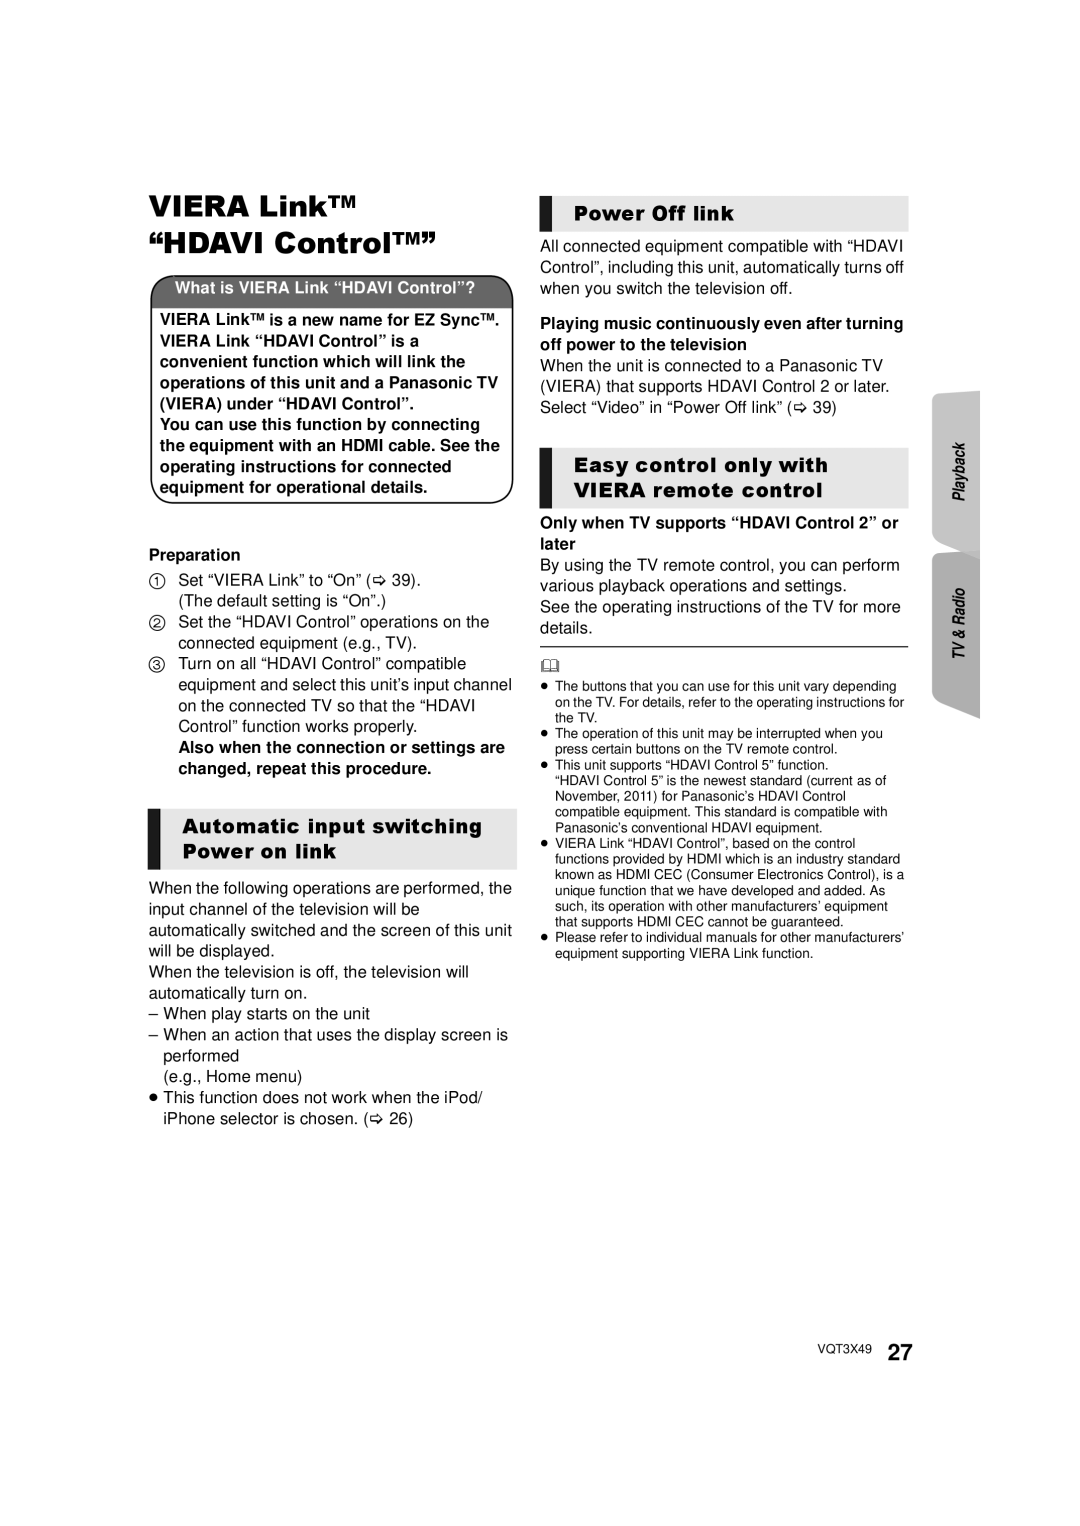 Panasonic SC-BTT490 owner manual VIERA LinkTM “HDAVI ControlTM”, Automatic input switching Power on link, Power Off link 